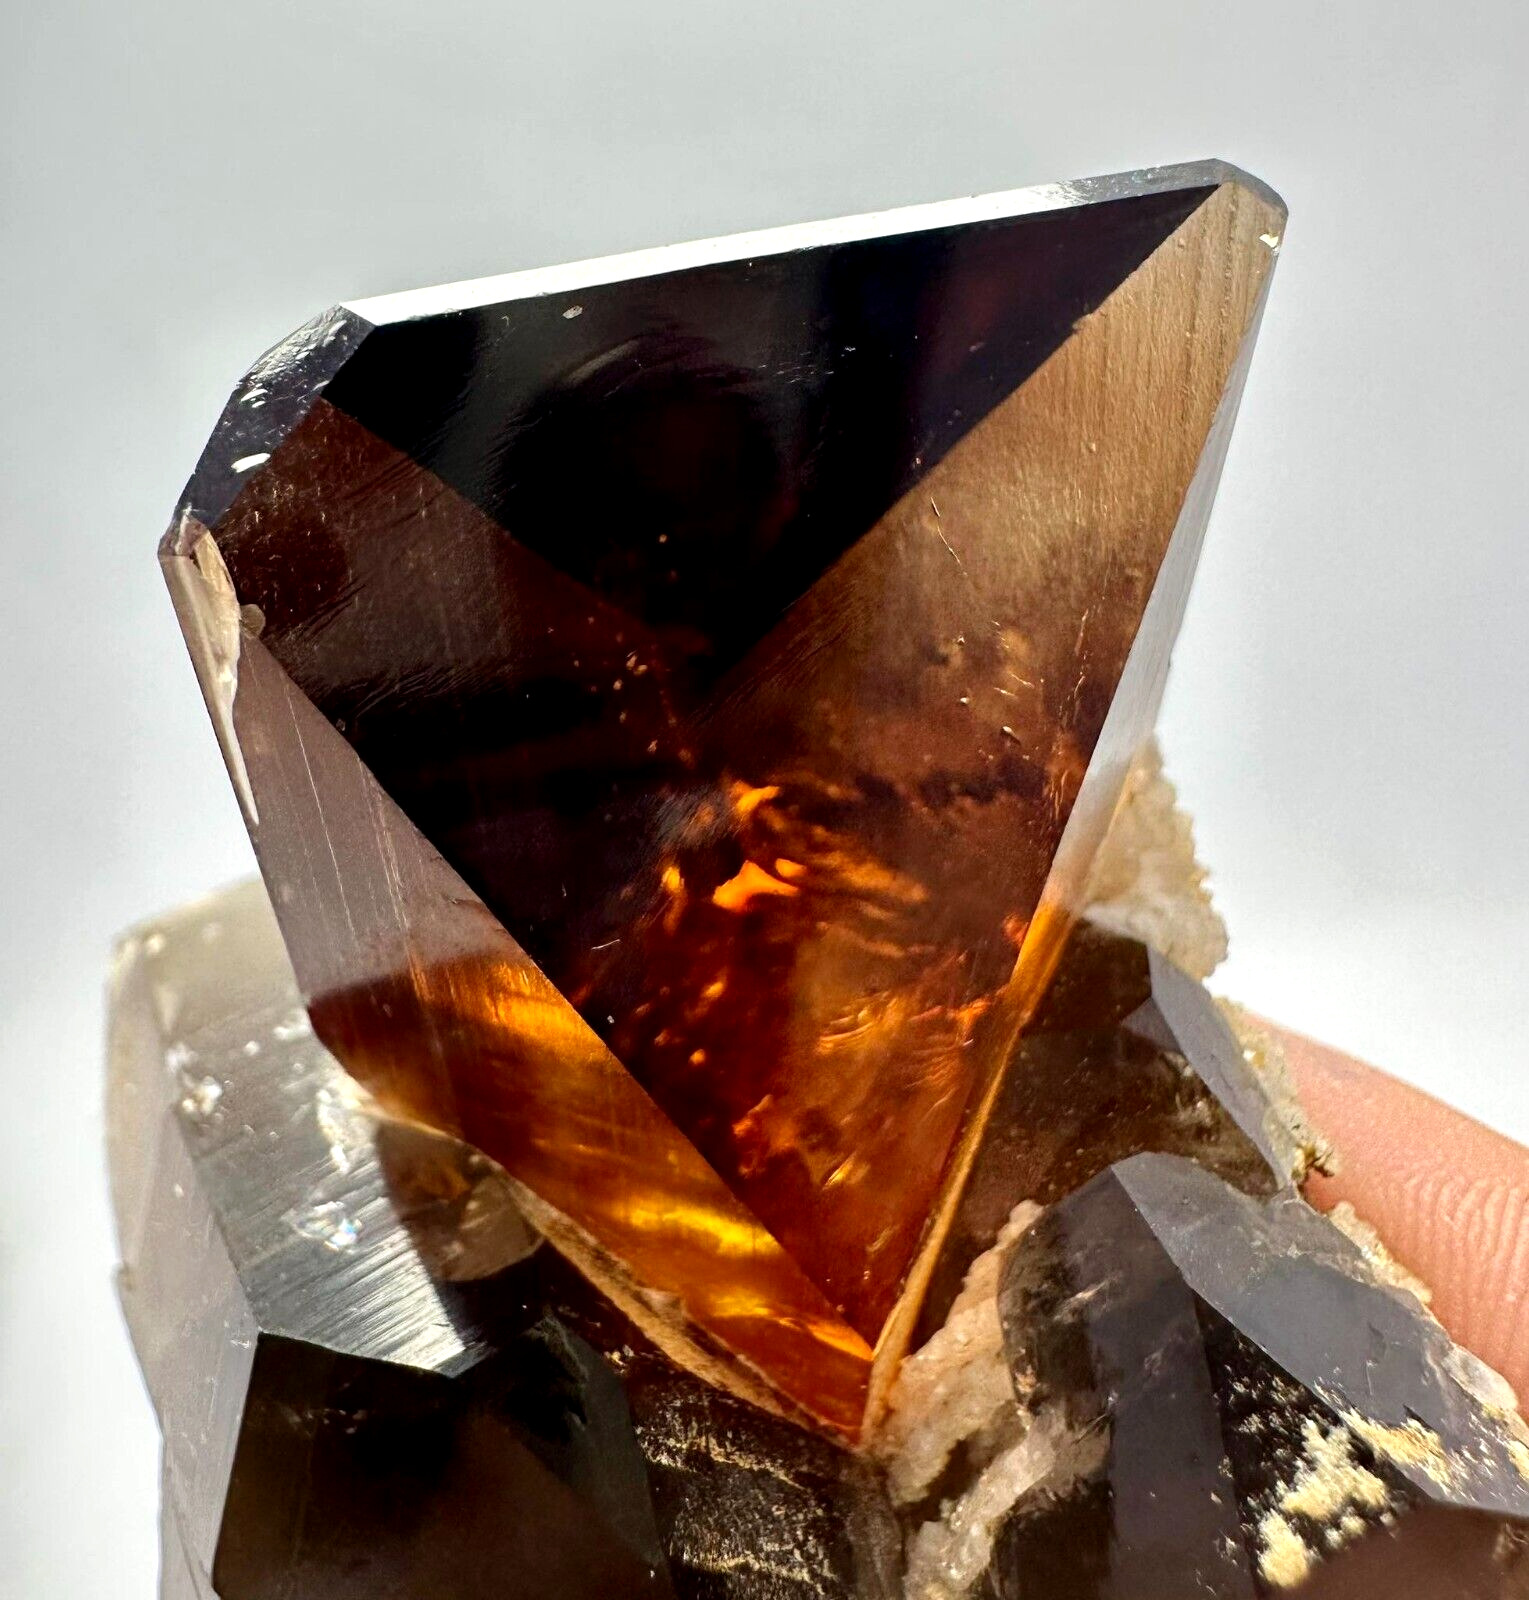 309 Carat EXTRAORDINARY  Topaz Crystal, With Quartz And Albite From @Pakistan